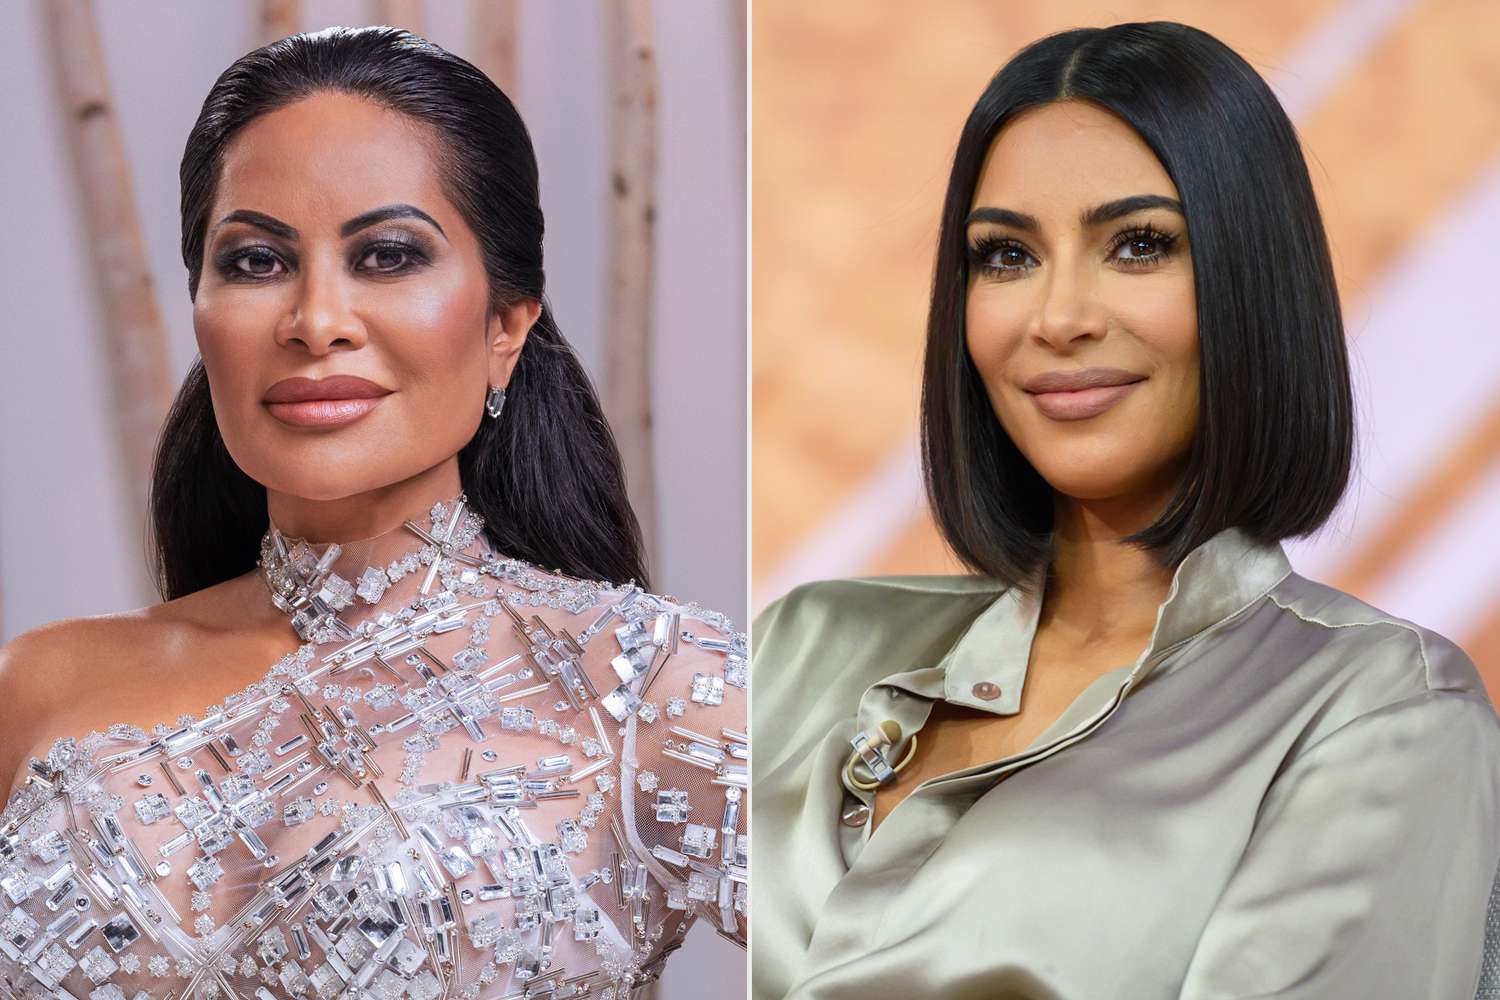 rhoslc-star-jen-shah-expresses-desire-for-kim-kardashian-to-portray-her-in-a-potential-biopic